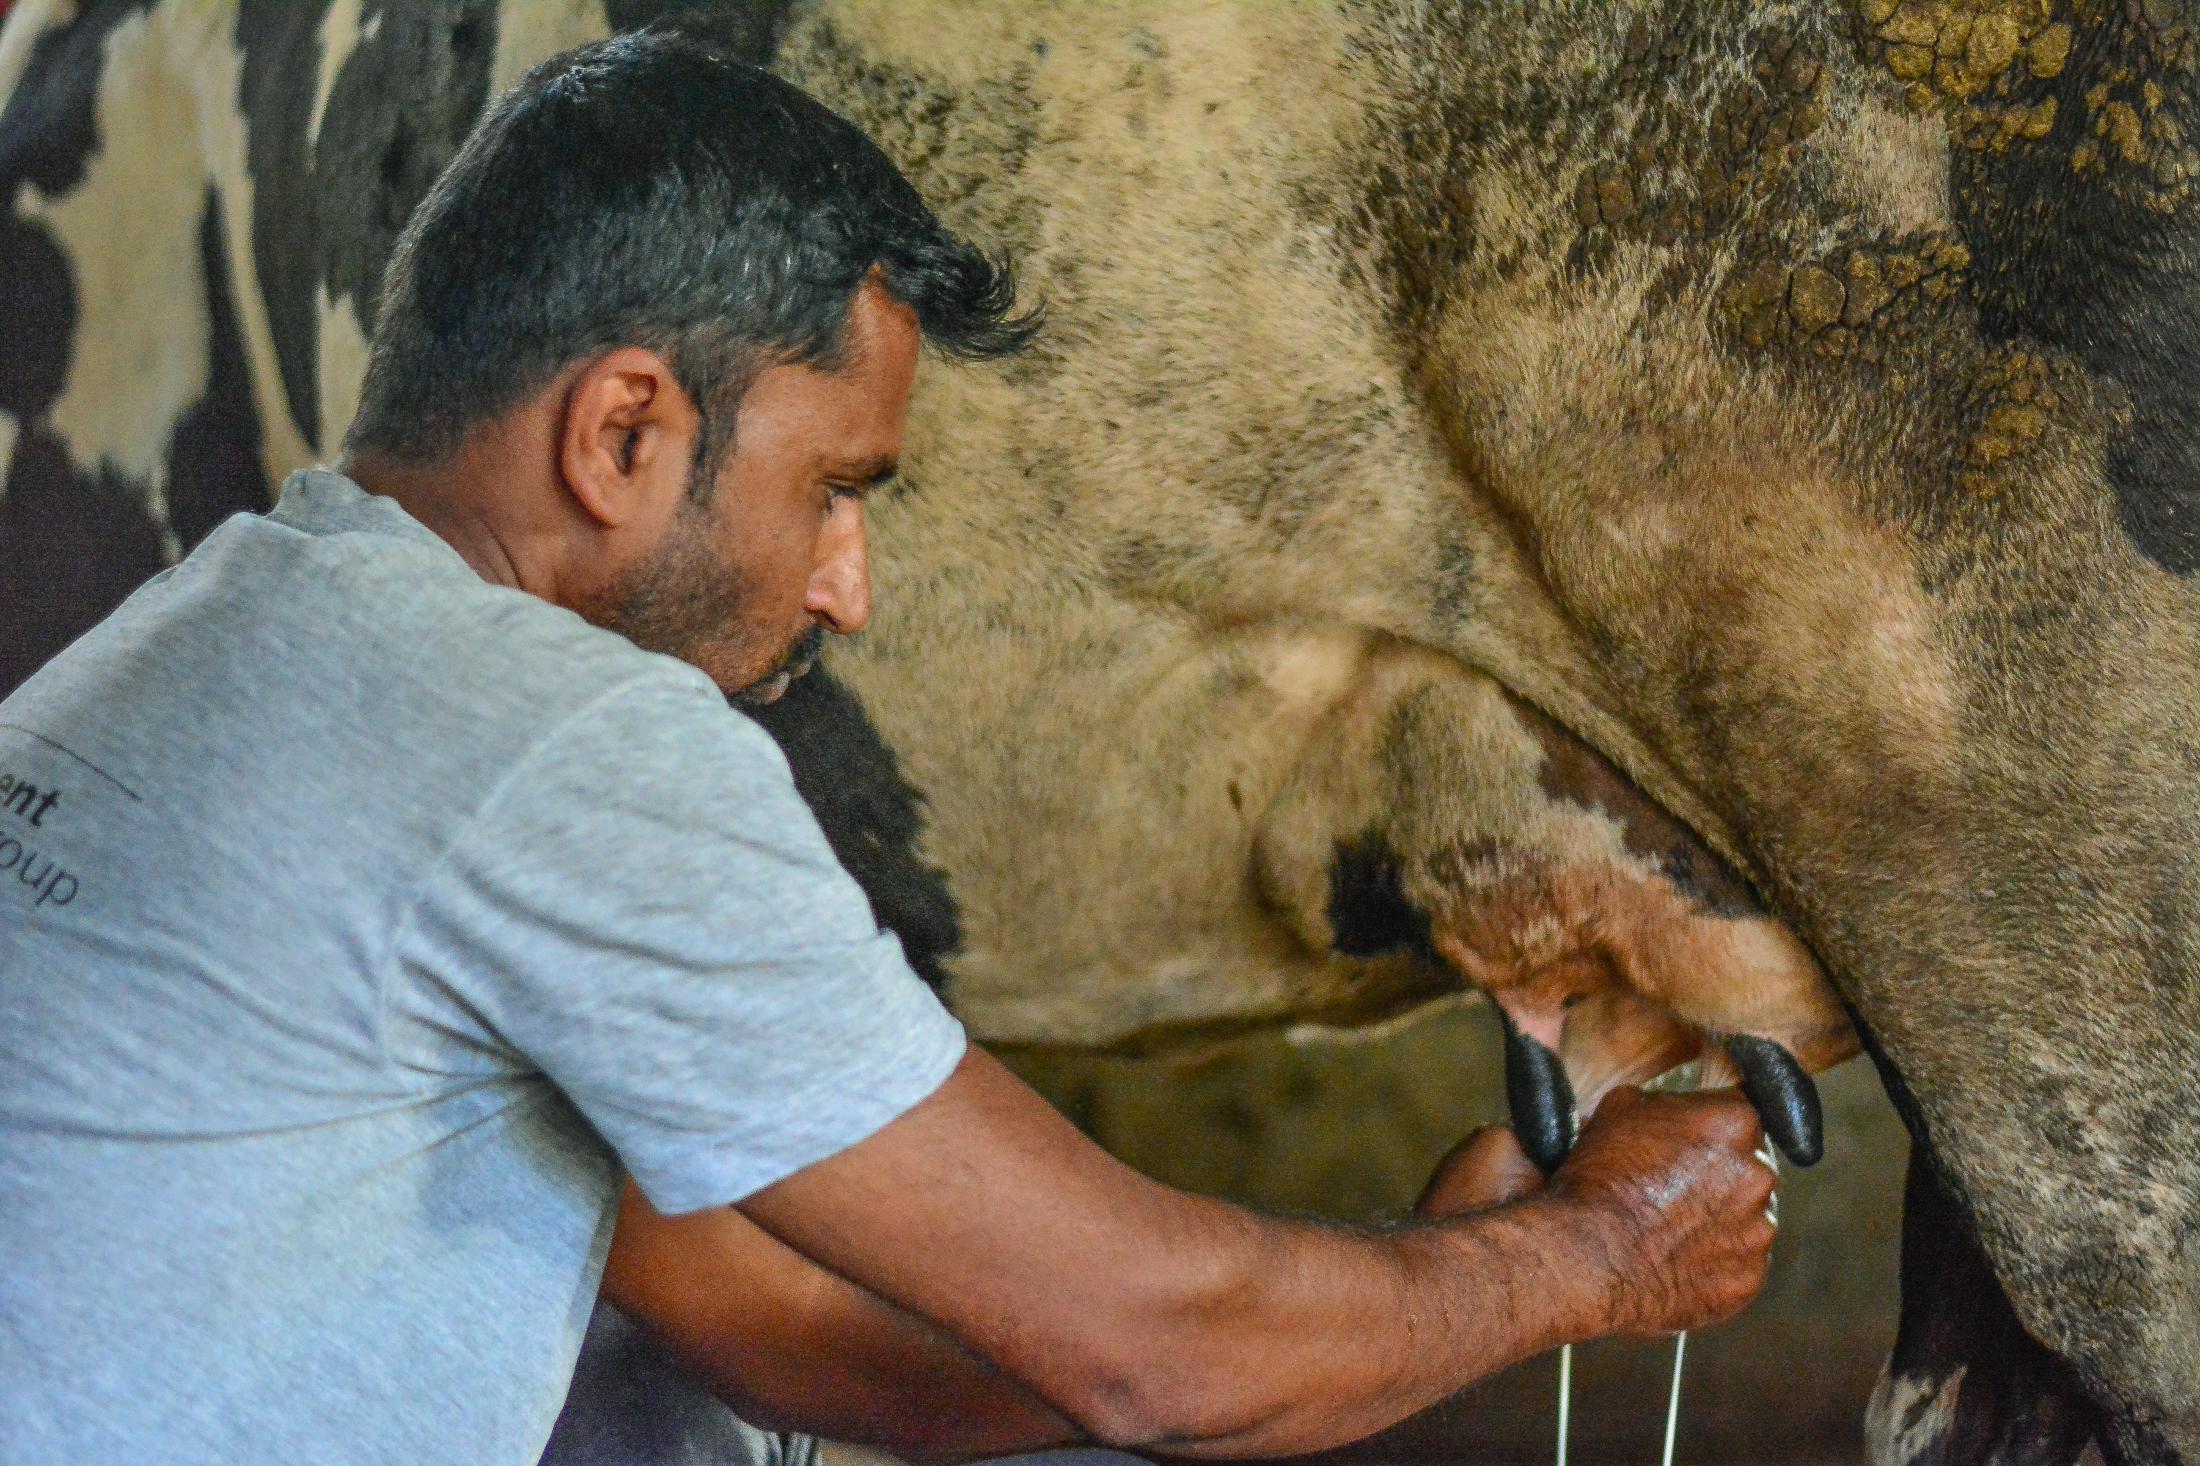 Swamy grows sweet potato and fodder at his farm to feed his cow and maintains a very clean environment. He milks his cow every evening around 5:30PM and takes this to the dairy.